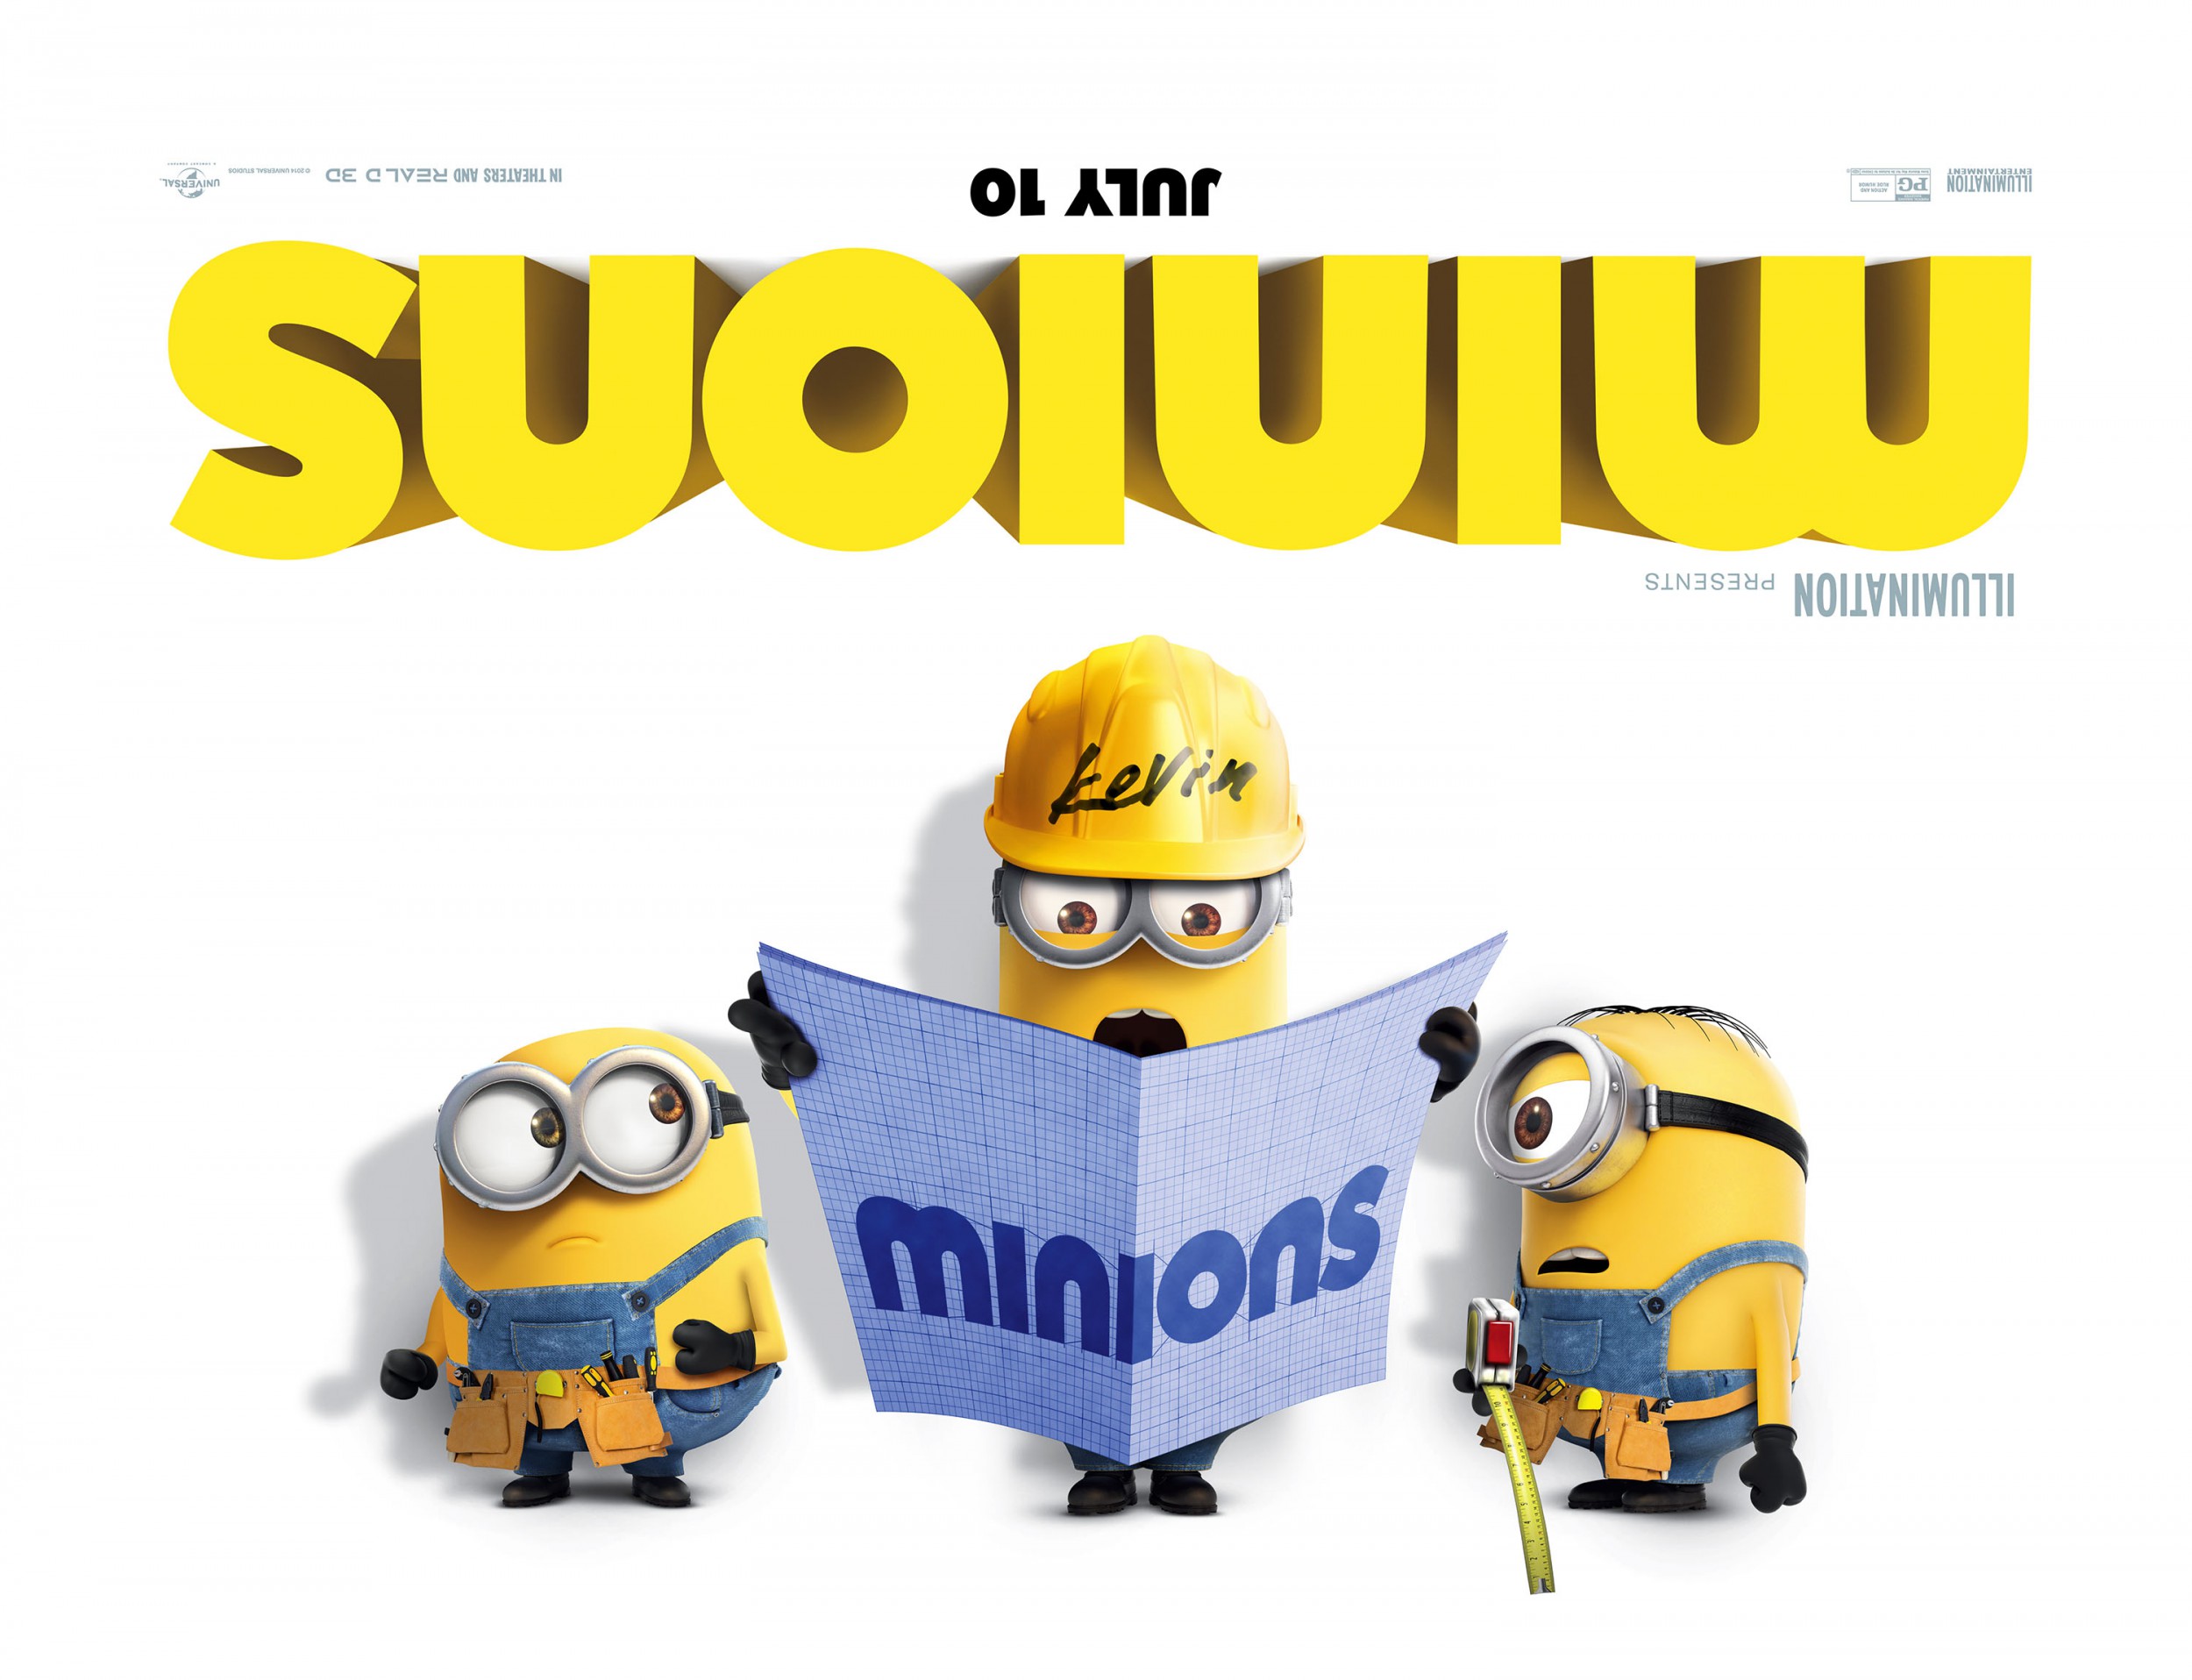 Mega Sized Movie Poster Image for Minions (#16 of 19)